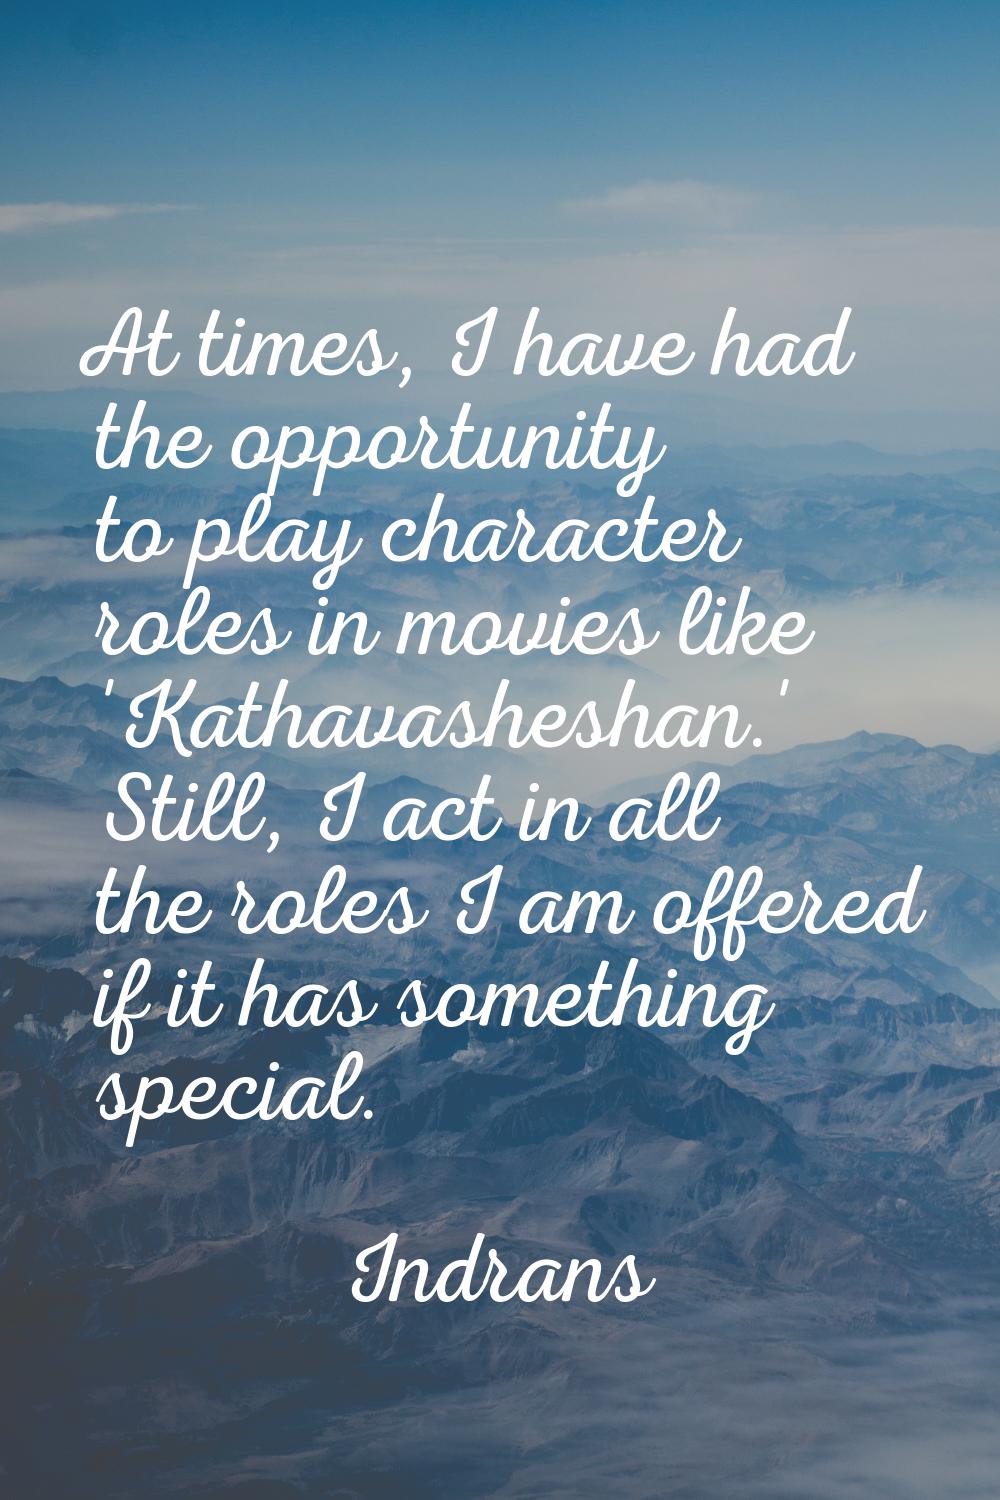 At times, I have had the opportunity to play character roles in movies like 'Kathavasheshan.' Still